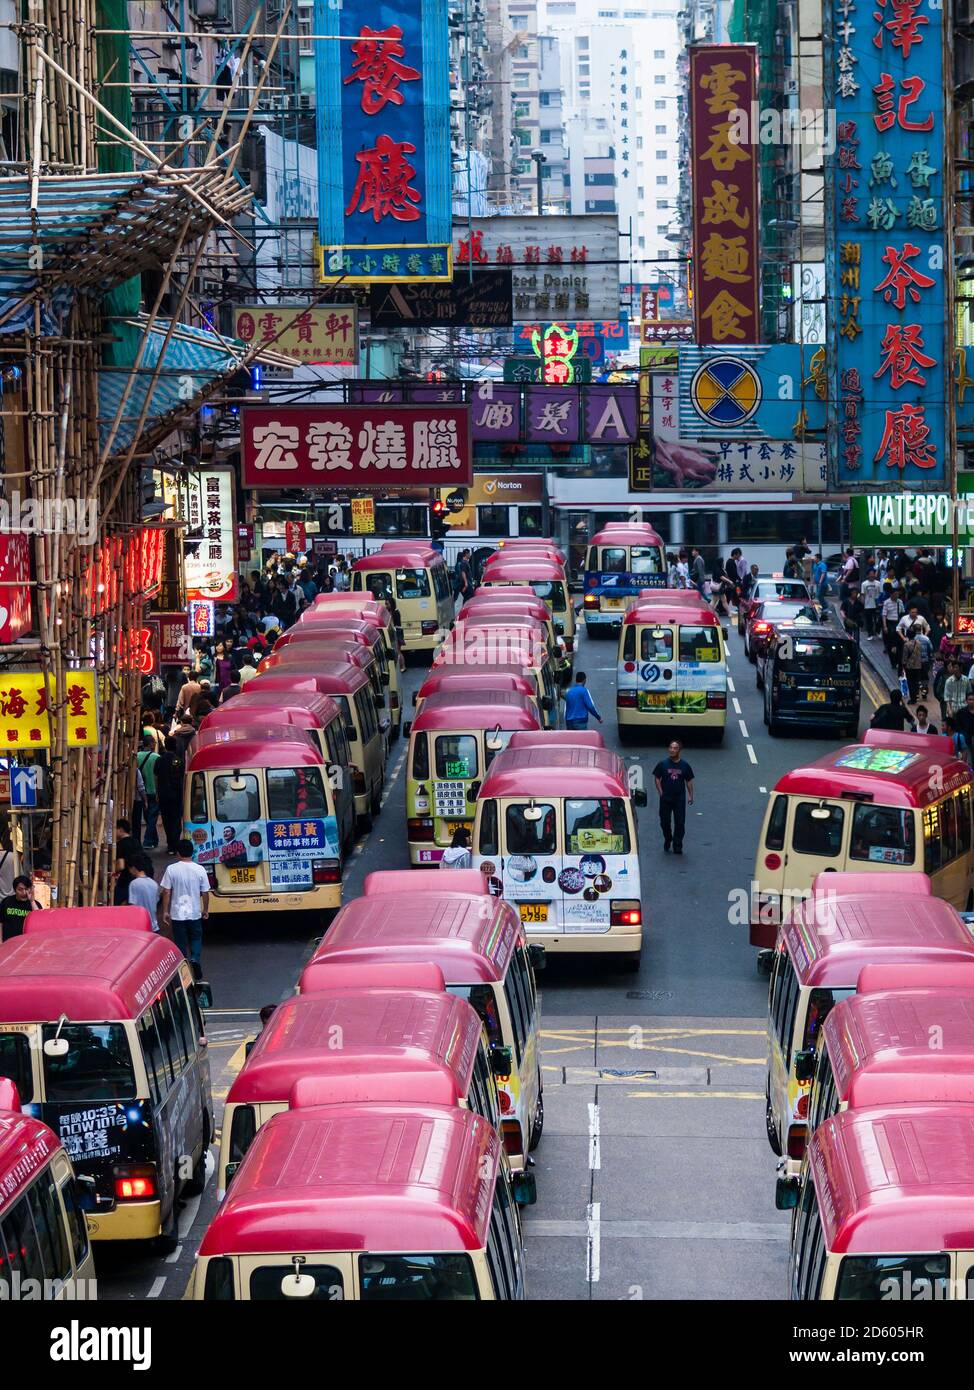 China, Hong Kong, Kowloon, street scene with advertising and taxi busses Stock Photo